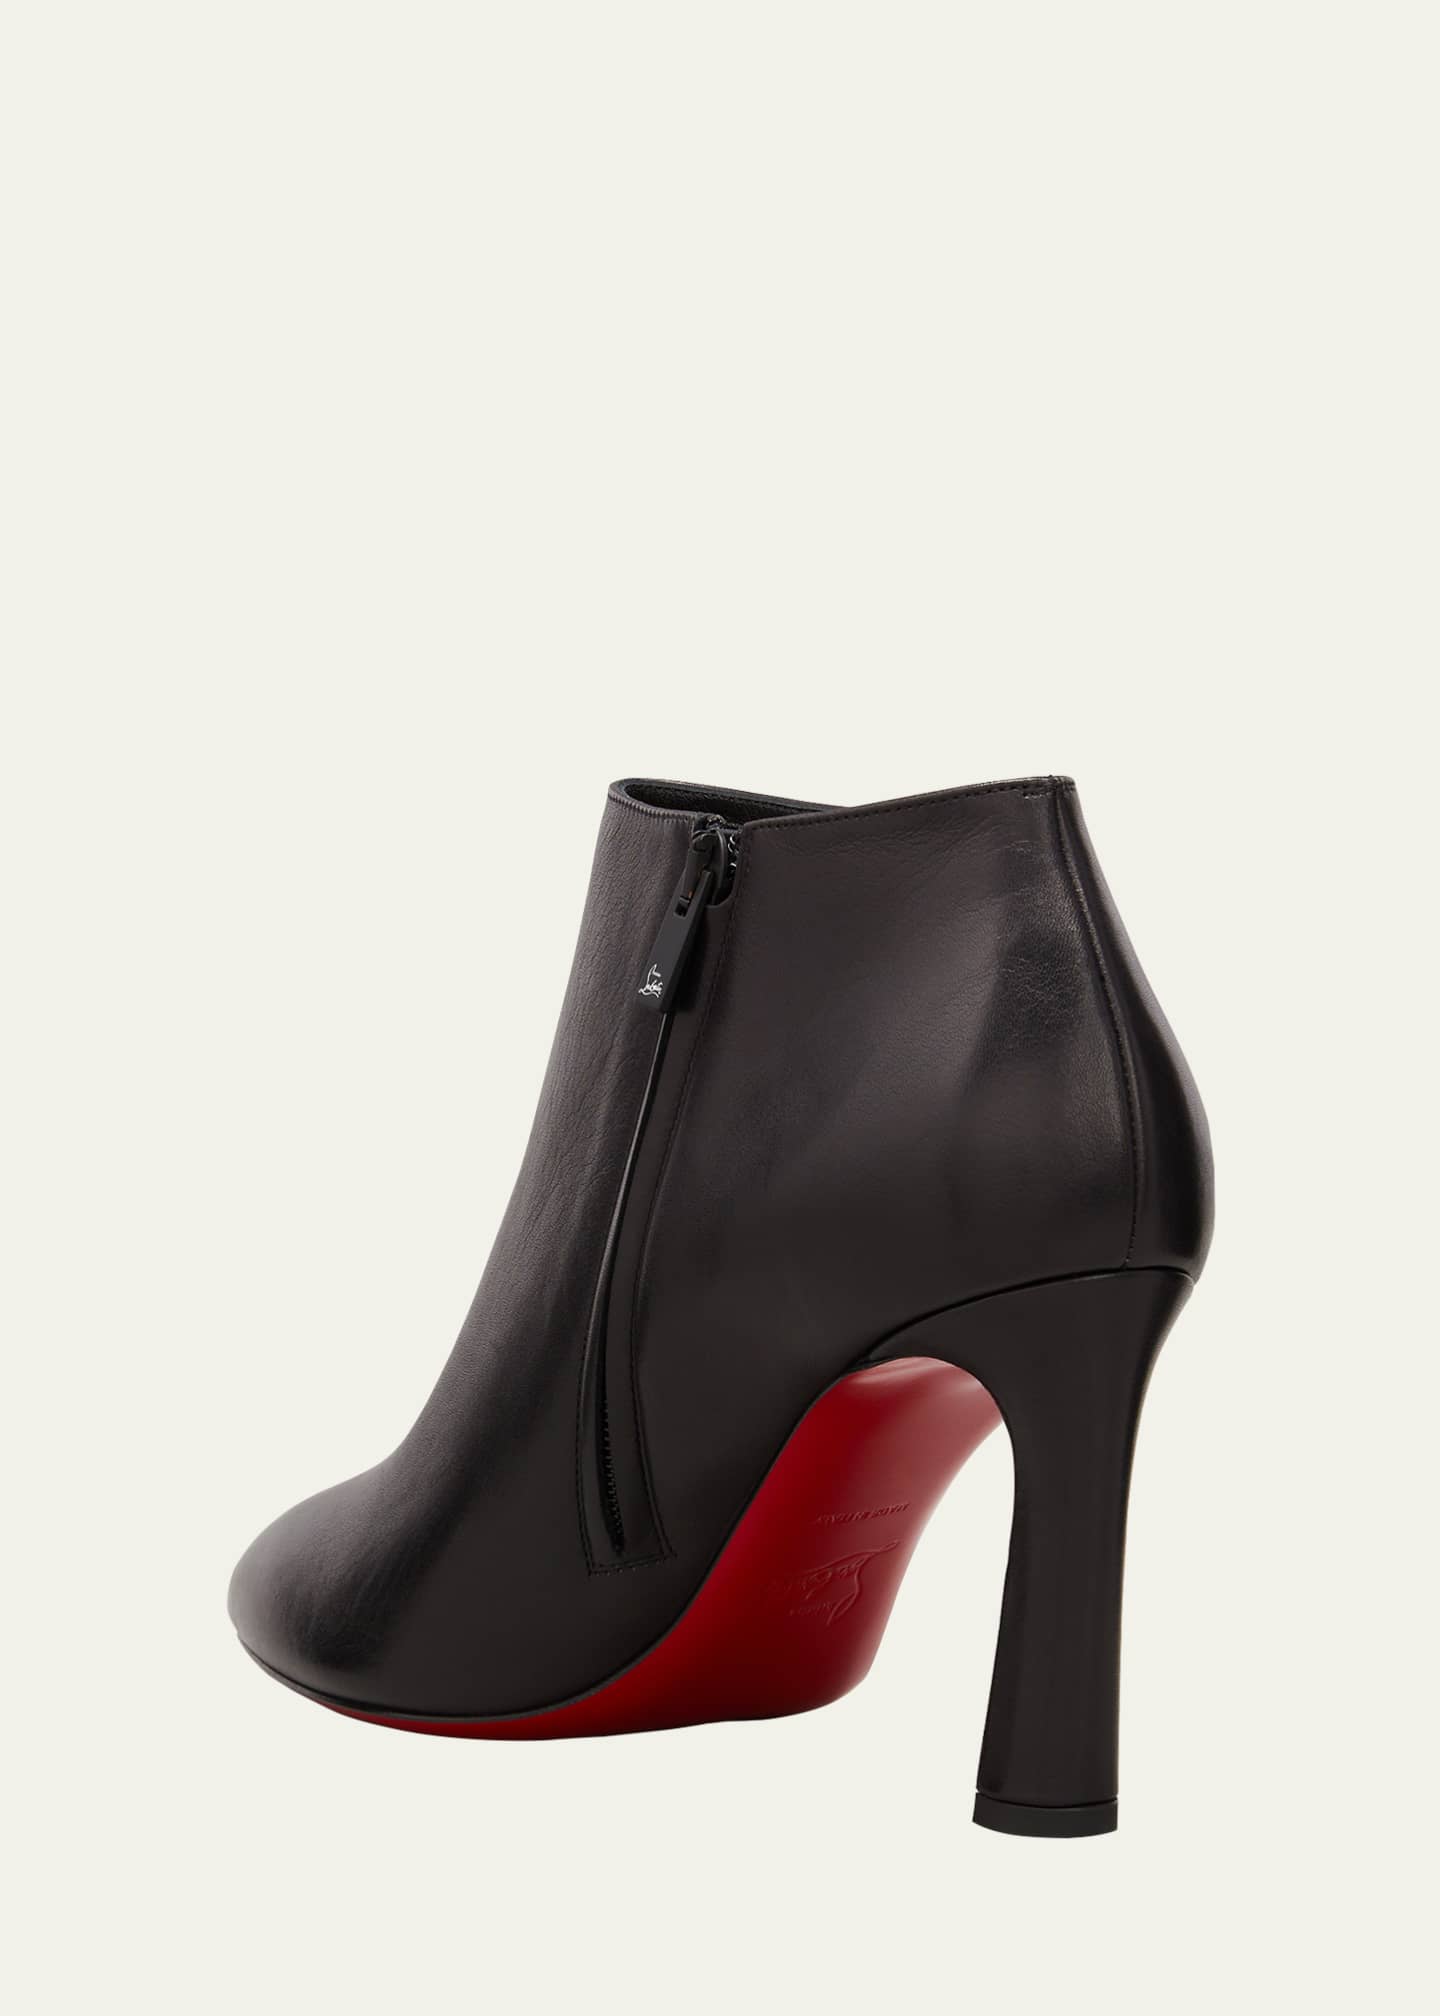 Christian Louboutin Eleonor Tall Suede Red Sole Boots - ShopStyle